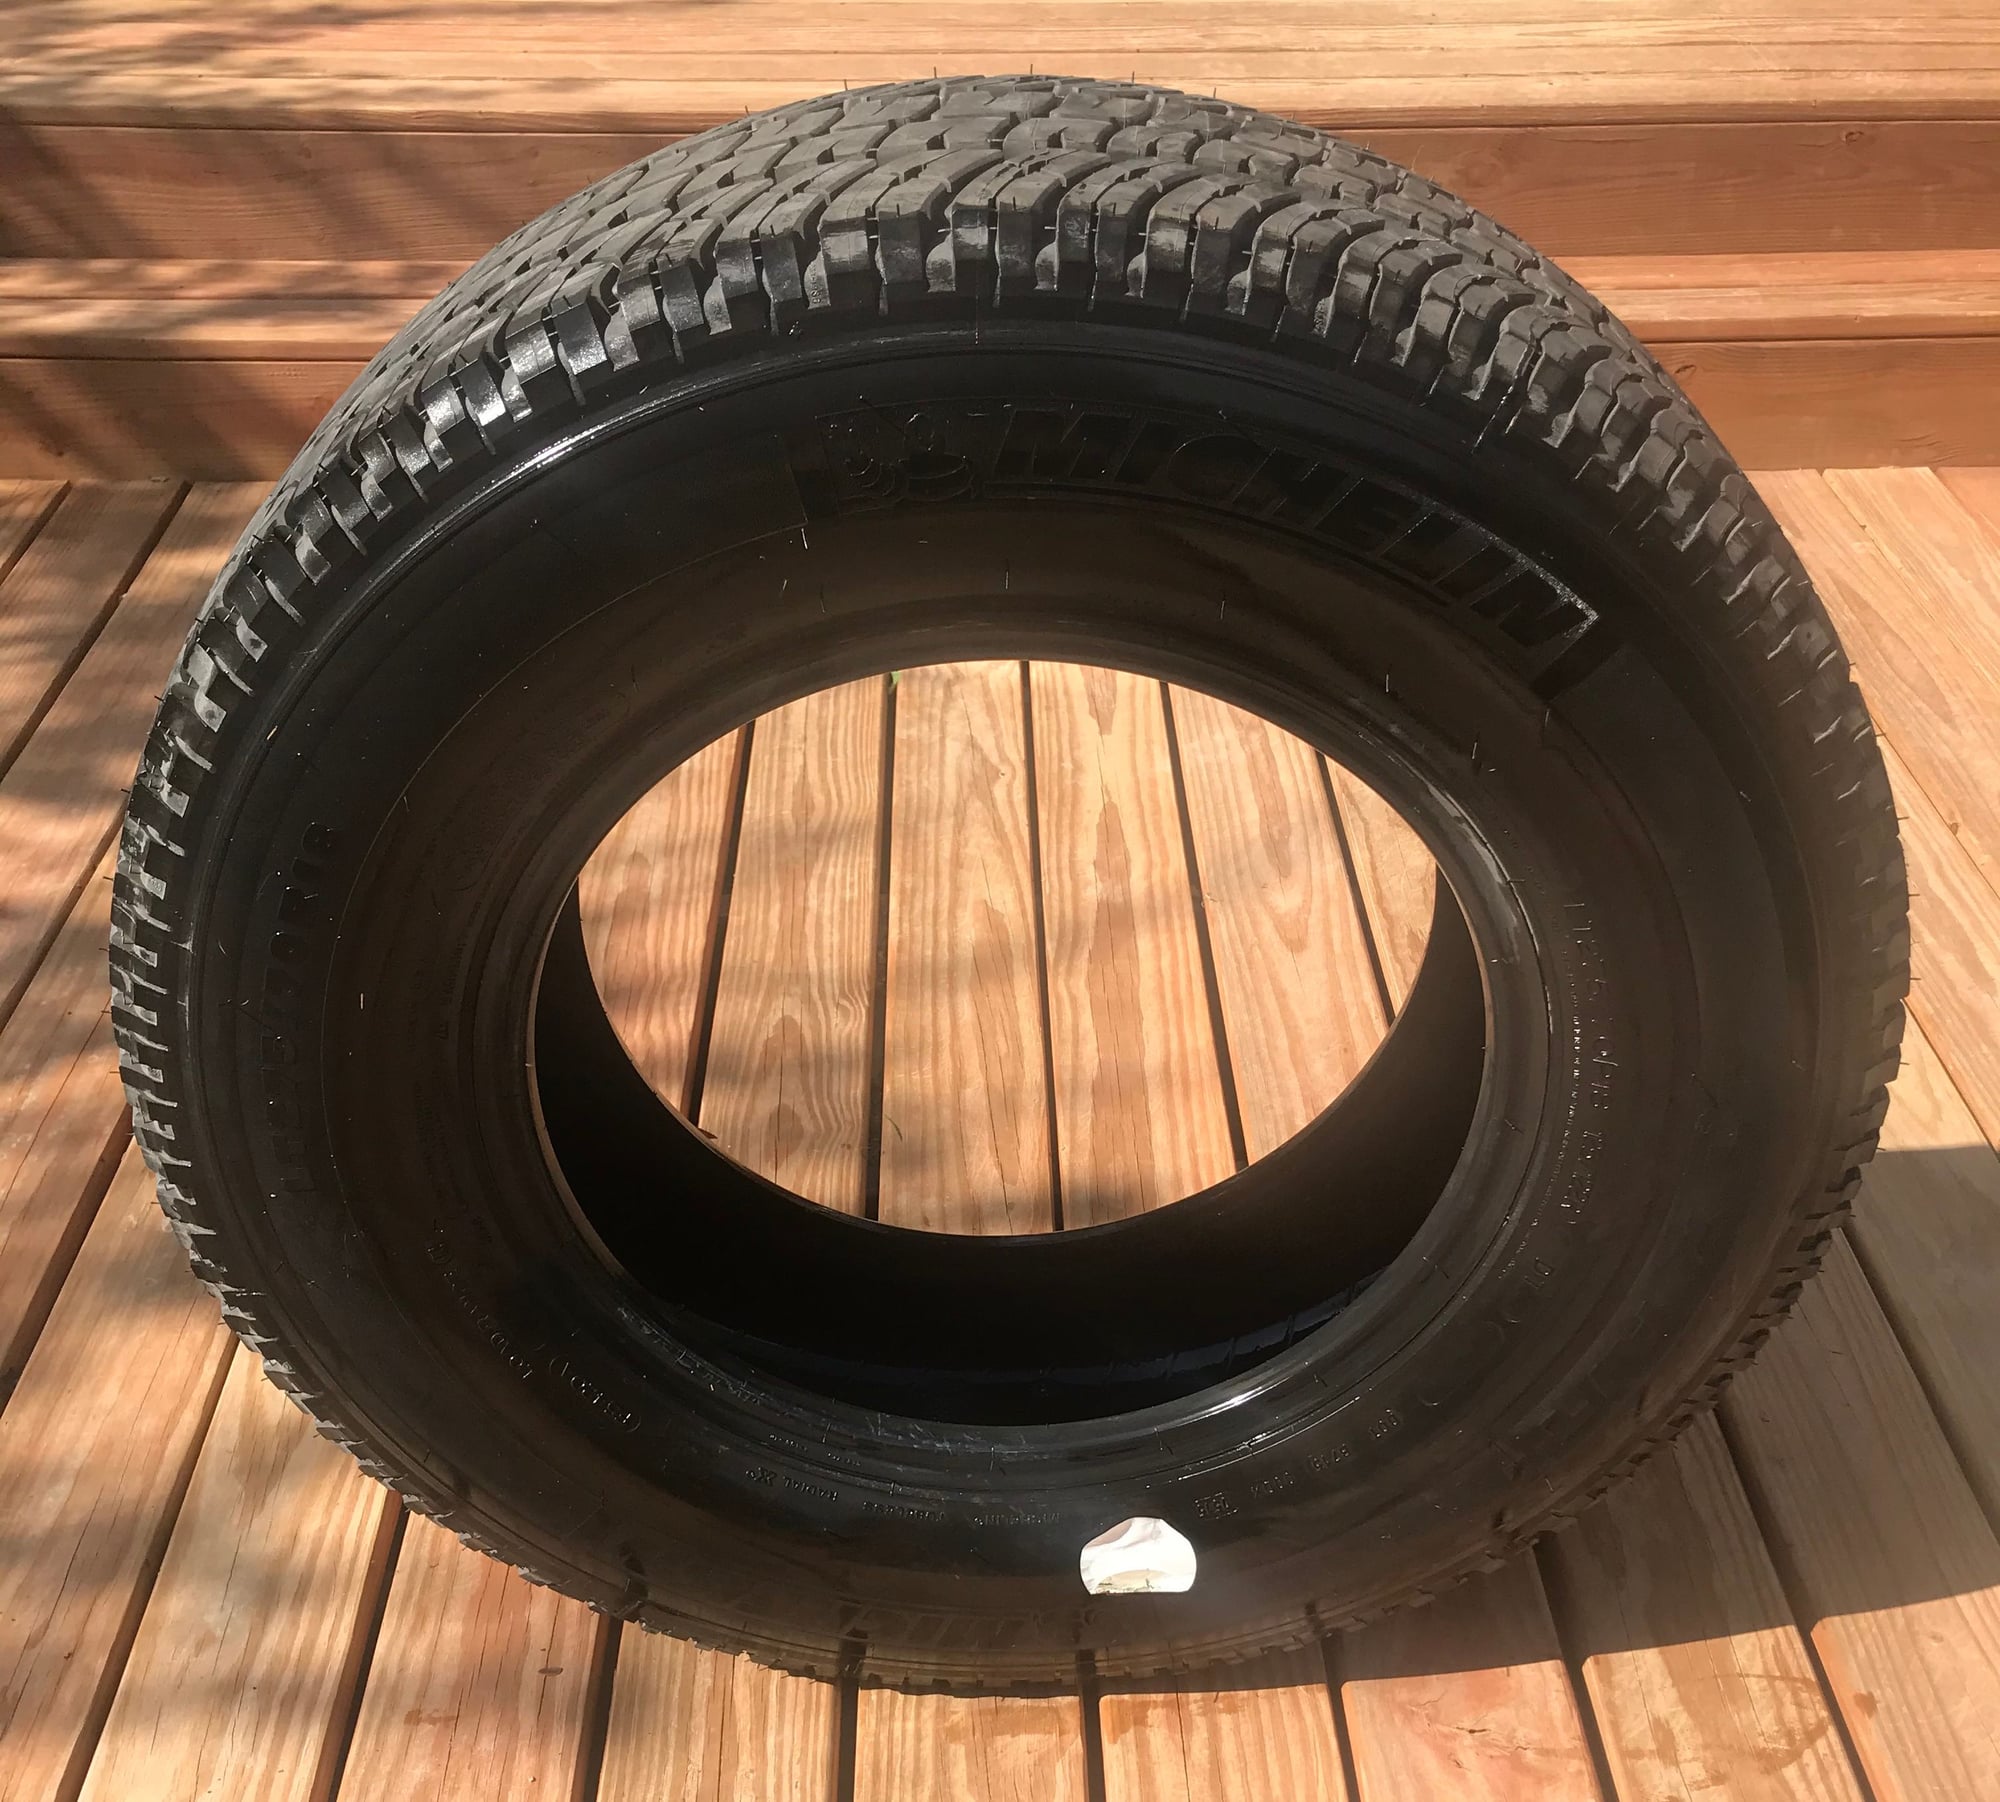 Wheels and Tires/Axles - Brand New Michelin LTX AT/2 275/70/18 - New - Brighton, CO 80601, United States